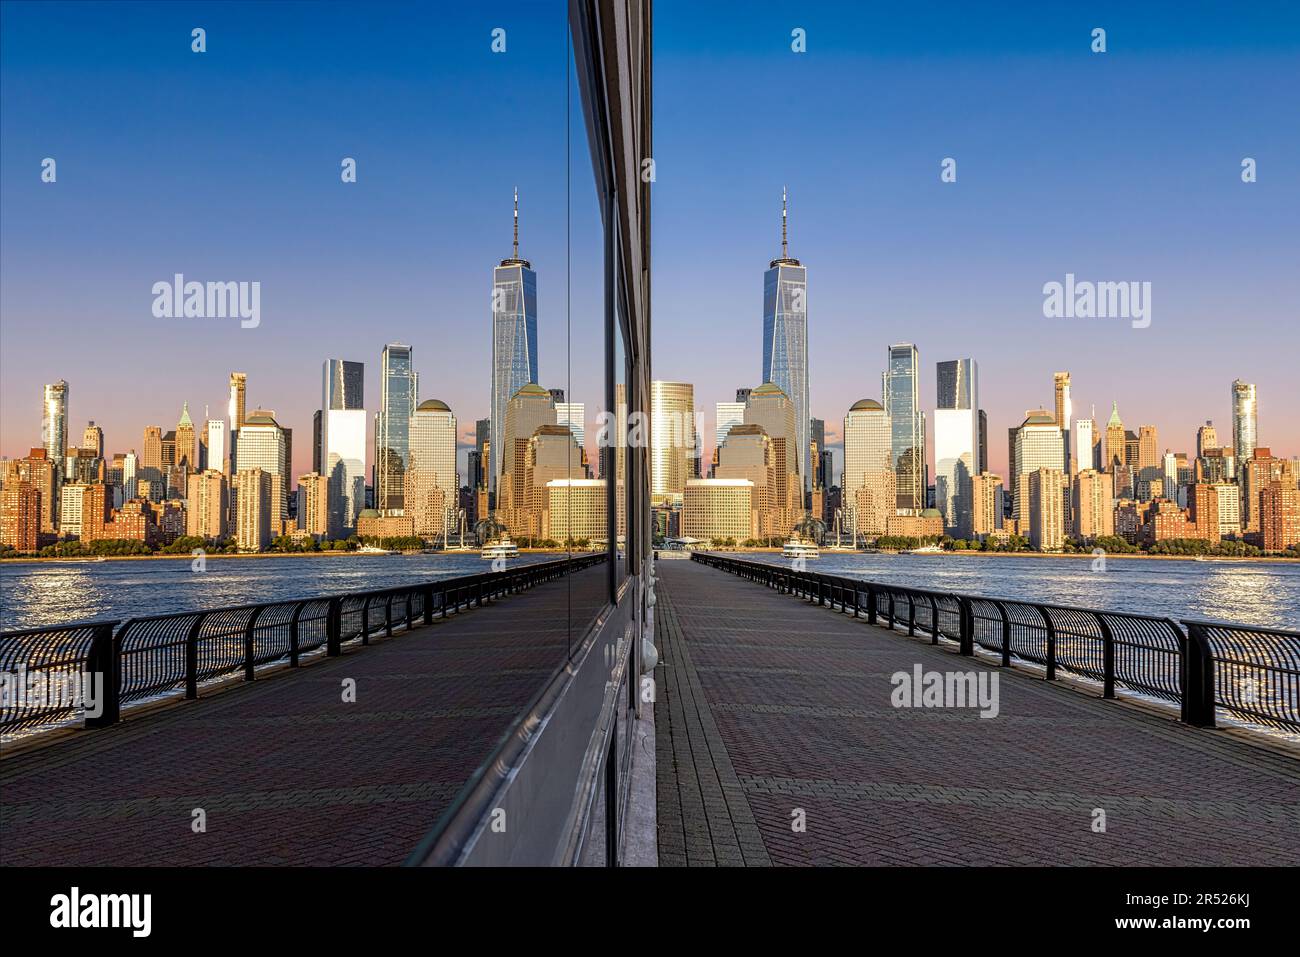 NYC Skyline Reflections - The NYC skyline with One World Trade Center, coined the Freedom Tower in lower Manhattan. Stock Photo